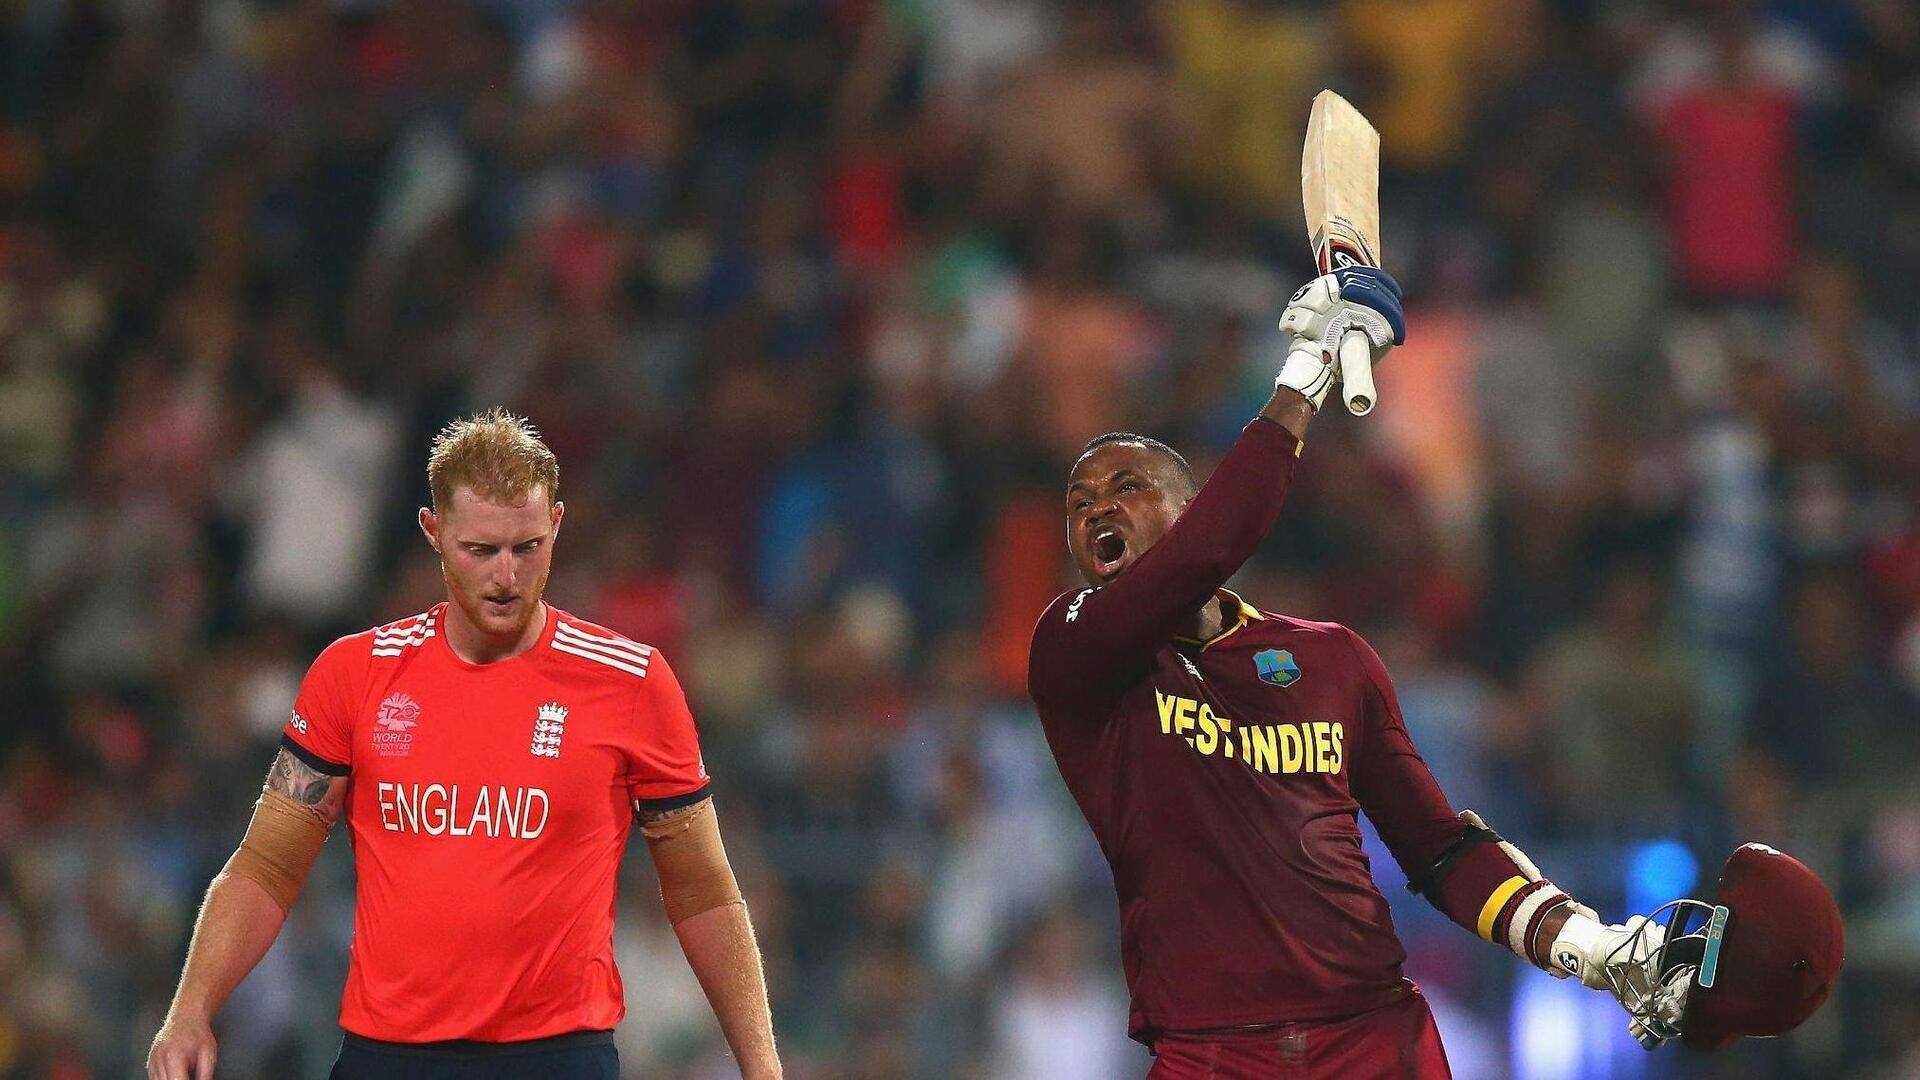 Marlon Samuels banned from all cricket for six years: Details